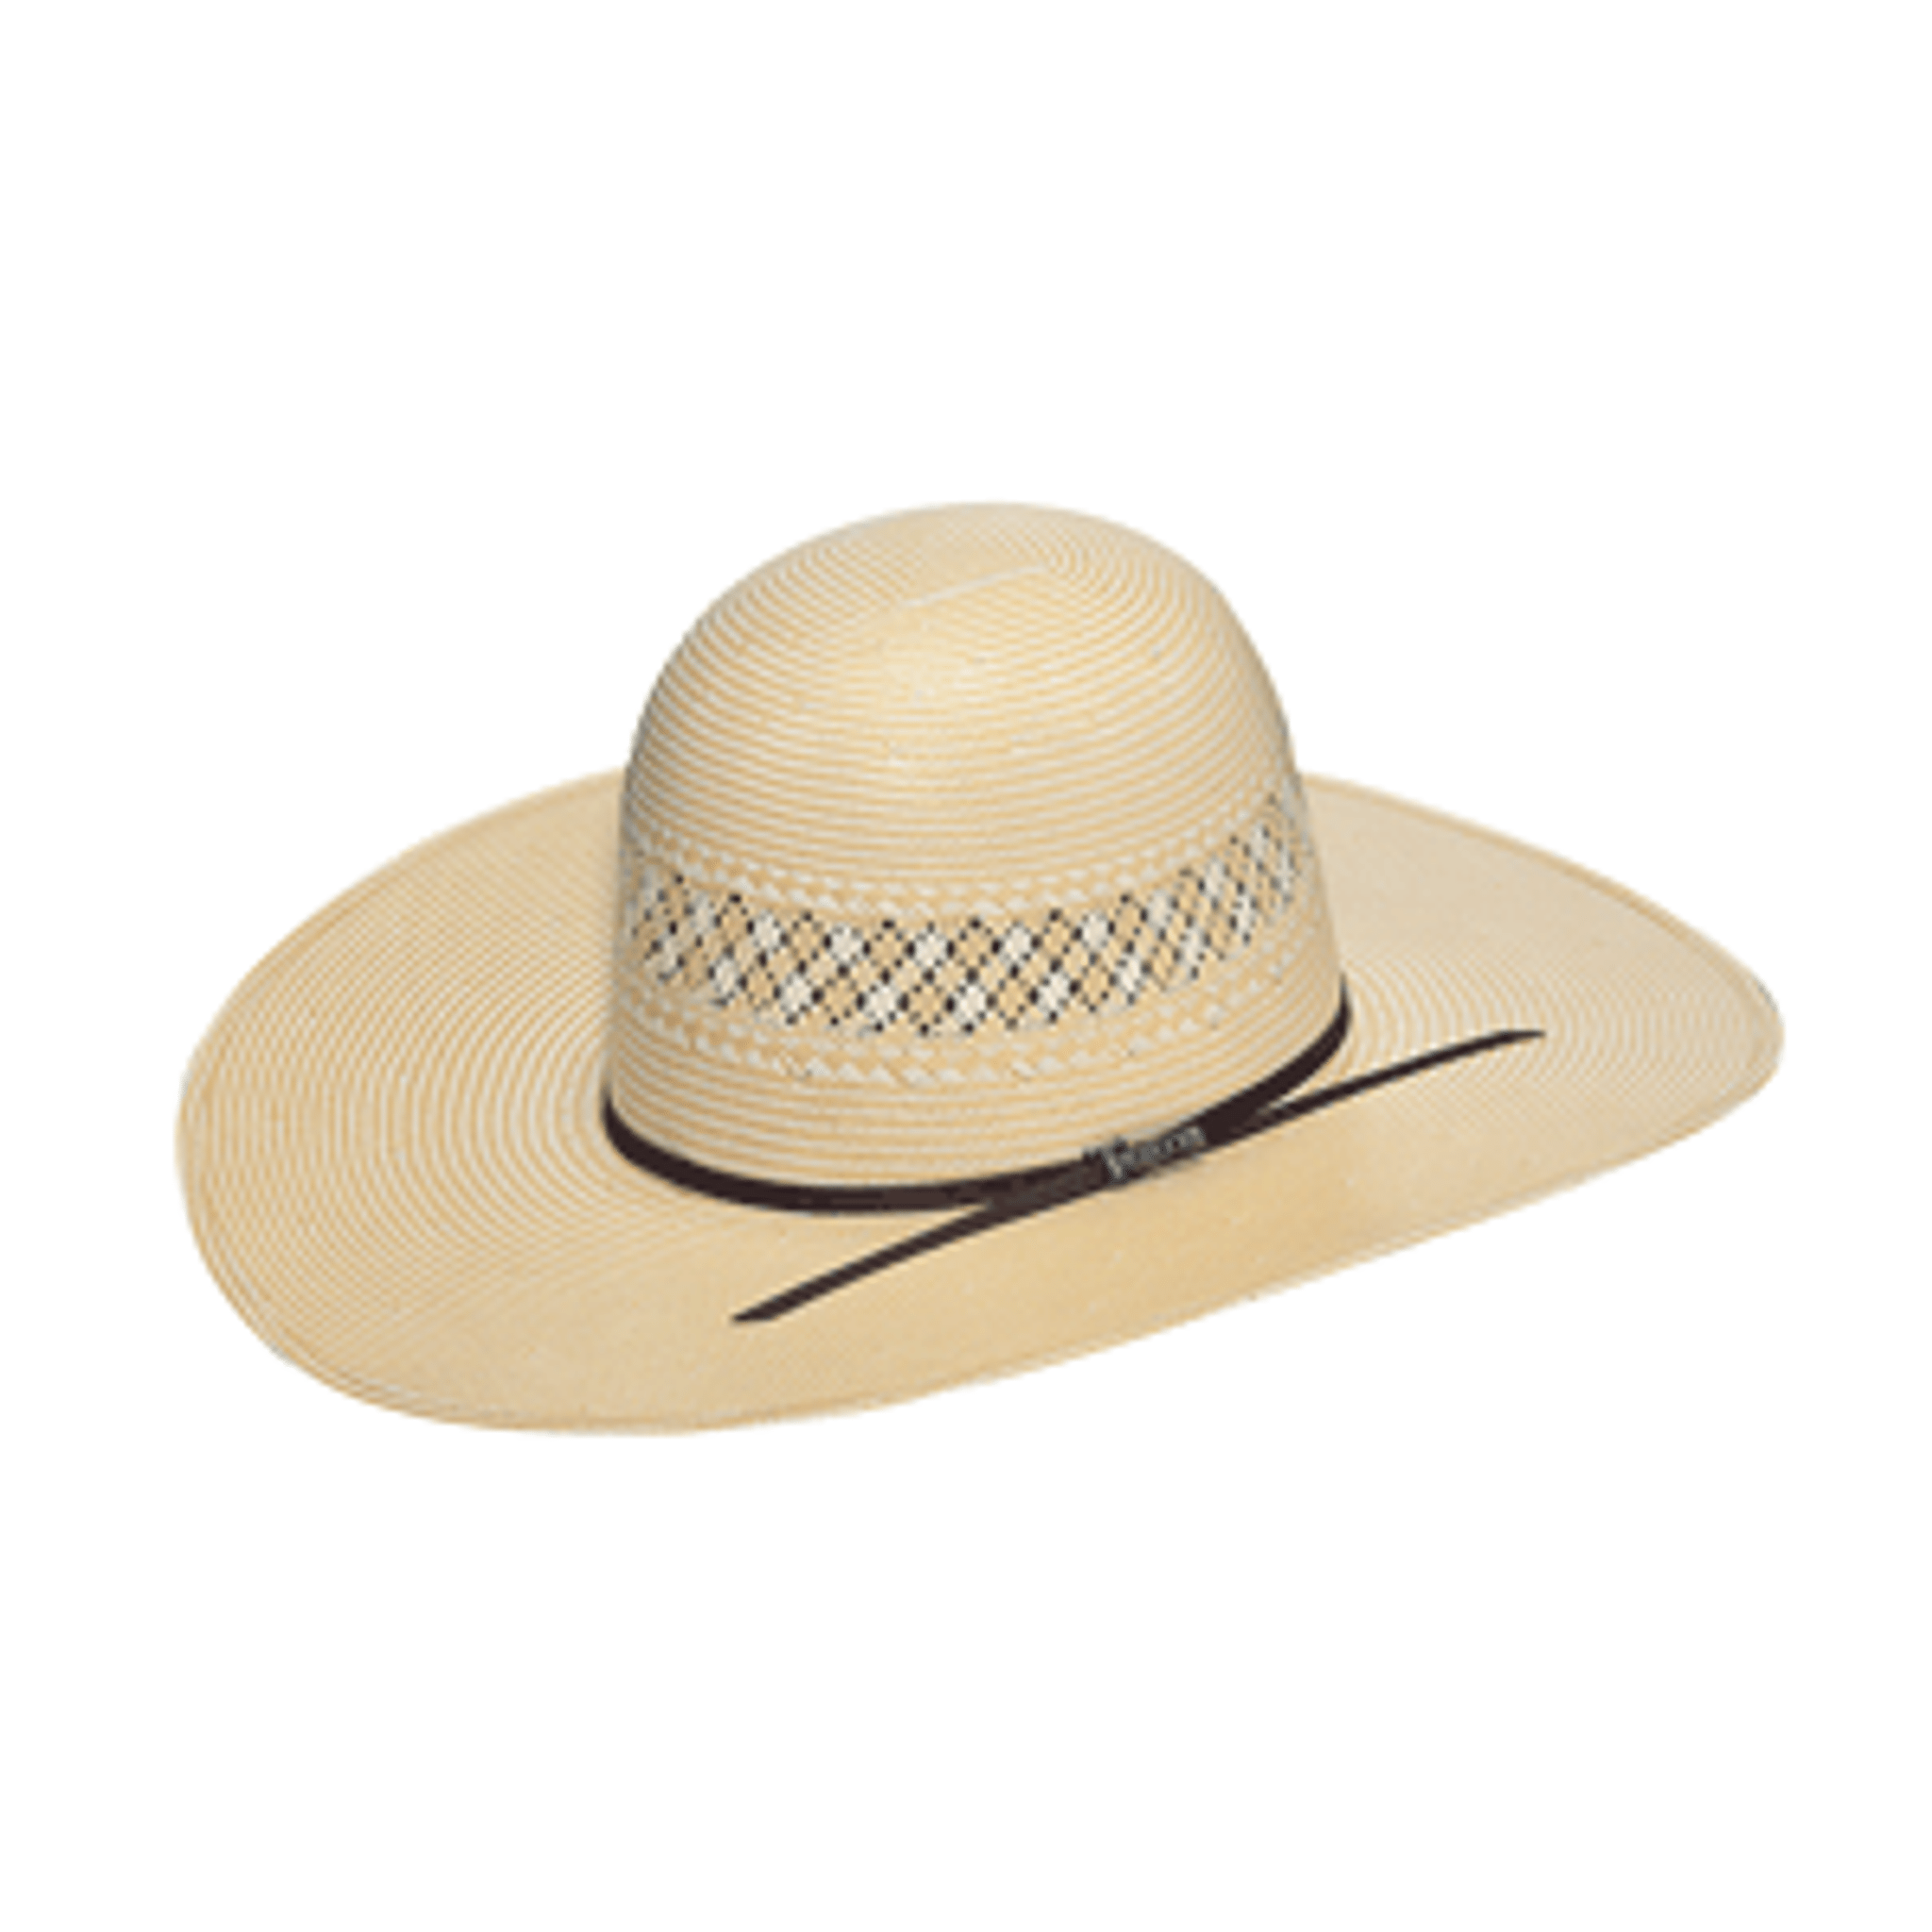 Twister Hats by M & F Western Products - Indy - Brown - Billy's